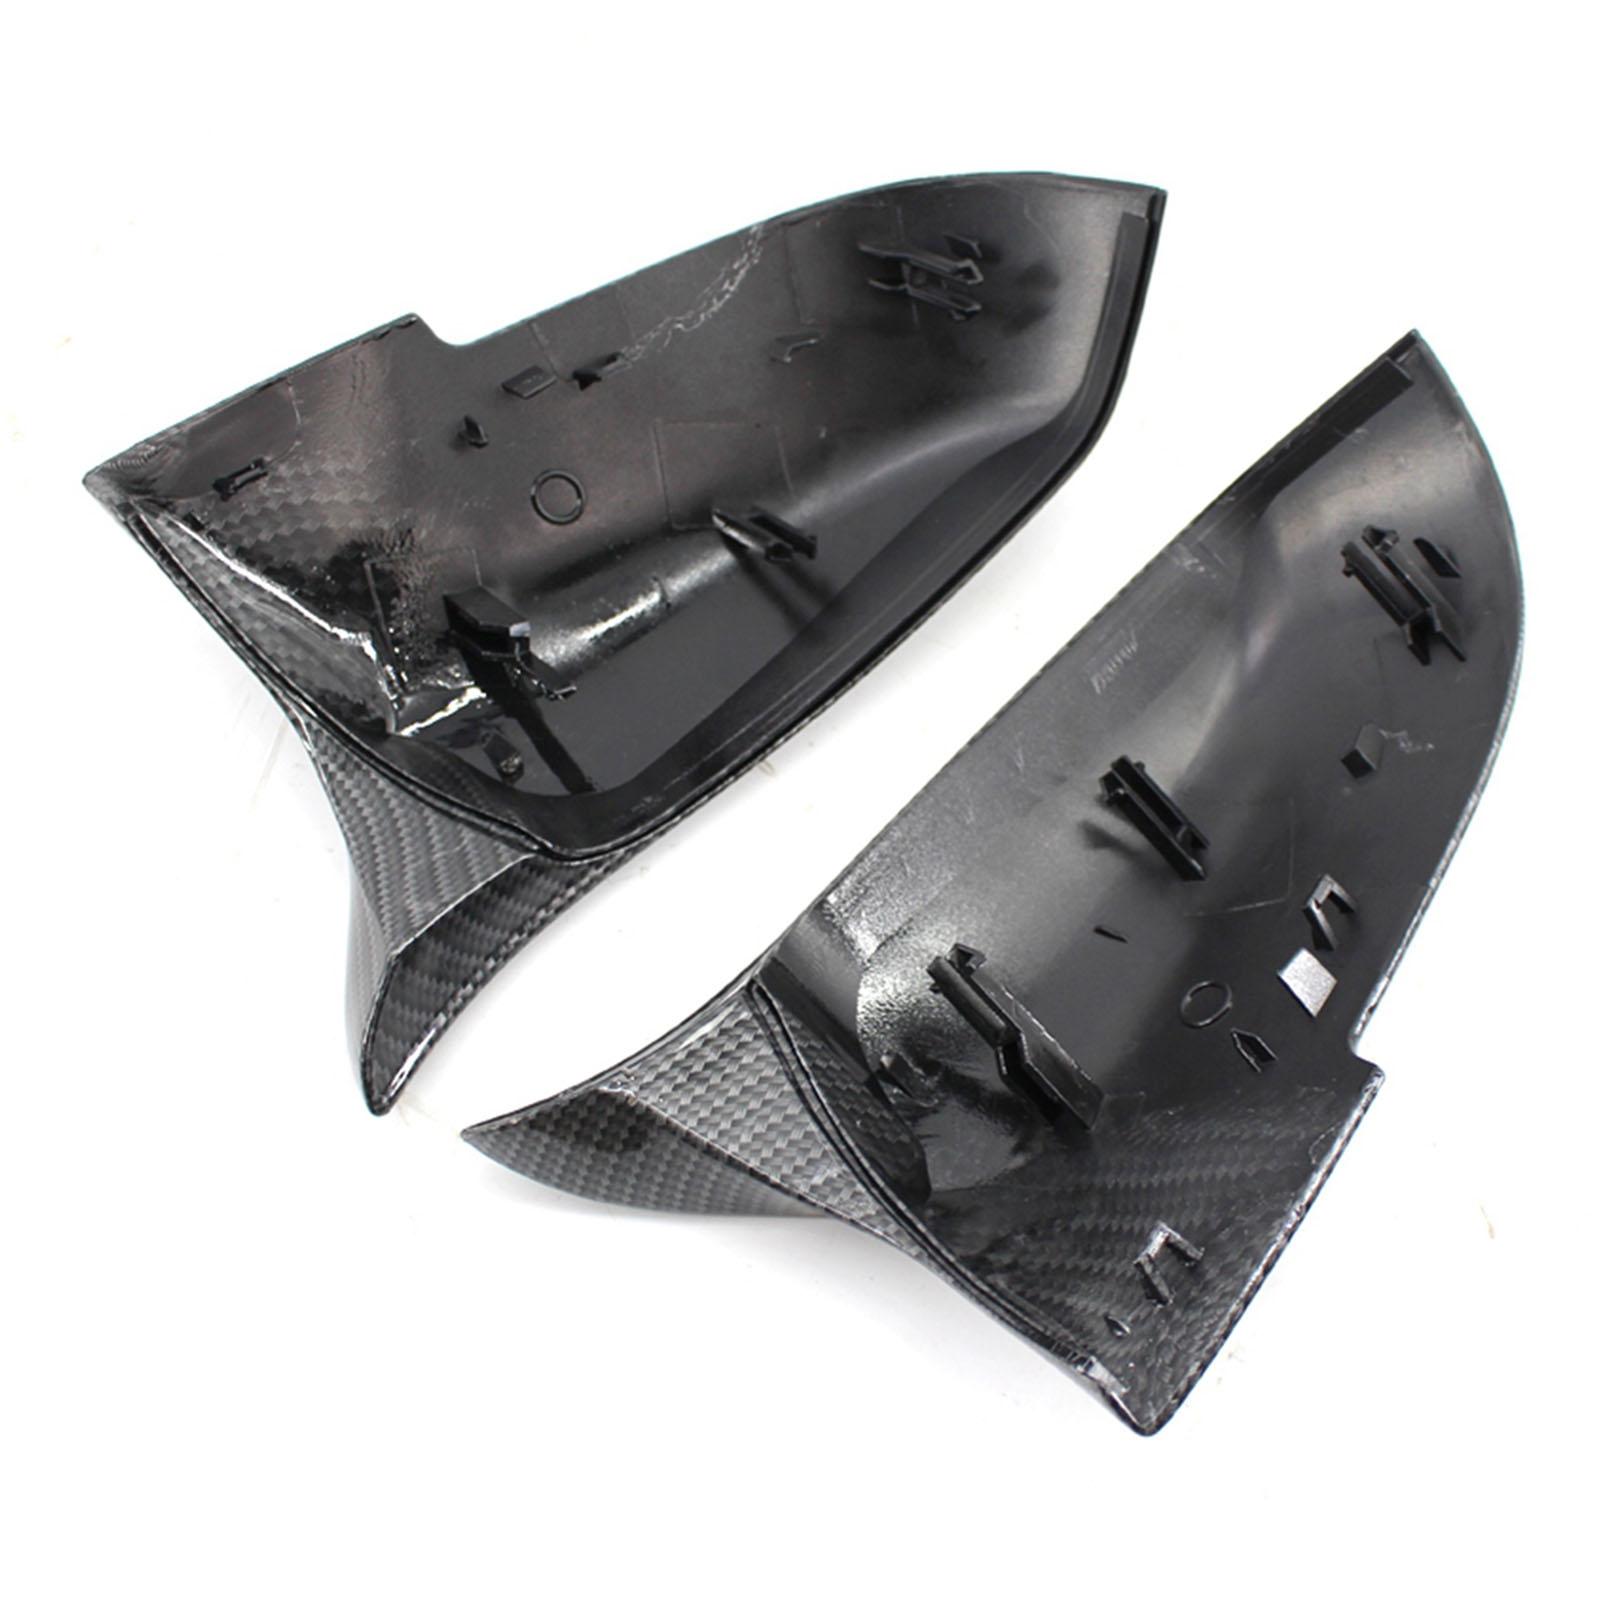 Hình ảnh 1 Pair of Carbon Fiber Rearview Mirror Cover Cap for  E84 F20 F21 F22 F30 F32 F33 F36 X1 M3, Protect Your Rearview Mirror From Damage.